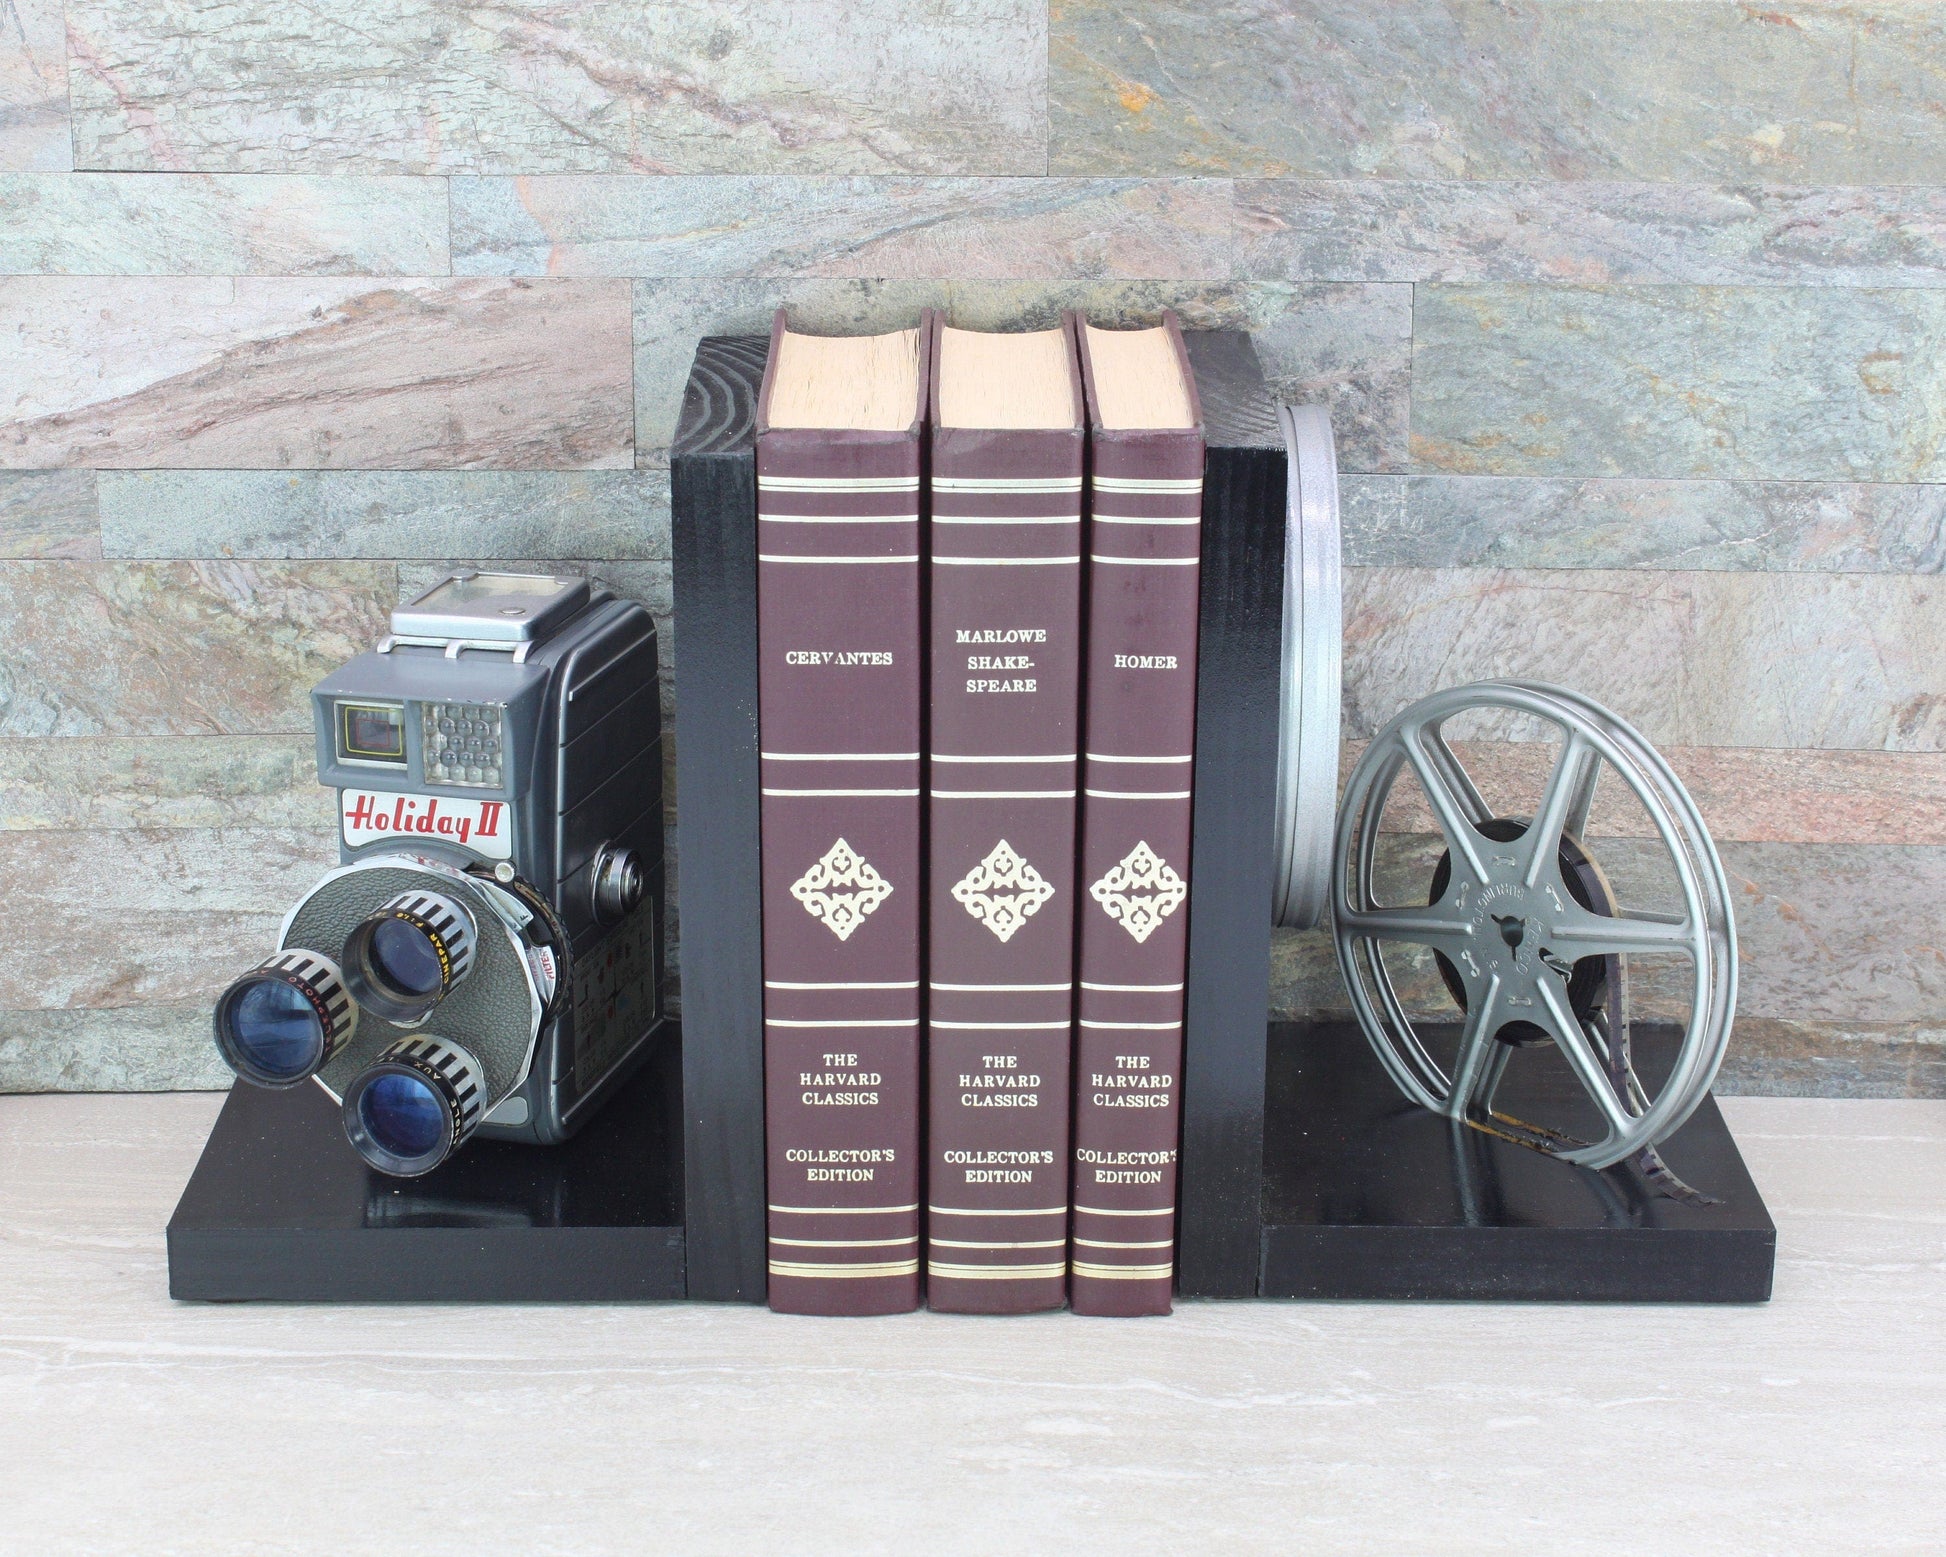 LightAndTimeArt Bookends Vintage Camera Bookends - DVD Holder - Mansfield Holiday II Triple Turret - Movie Room Decor - Film Maker gift - Actor and Actress gift